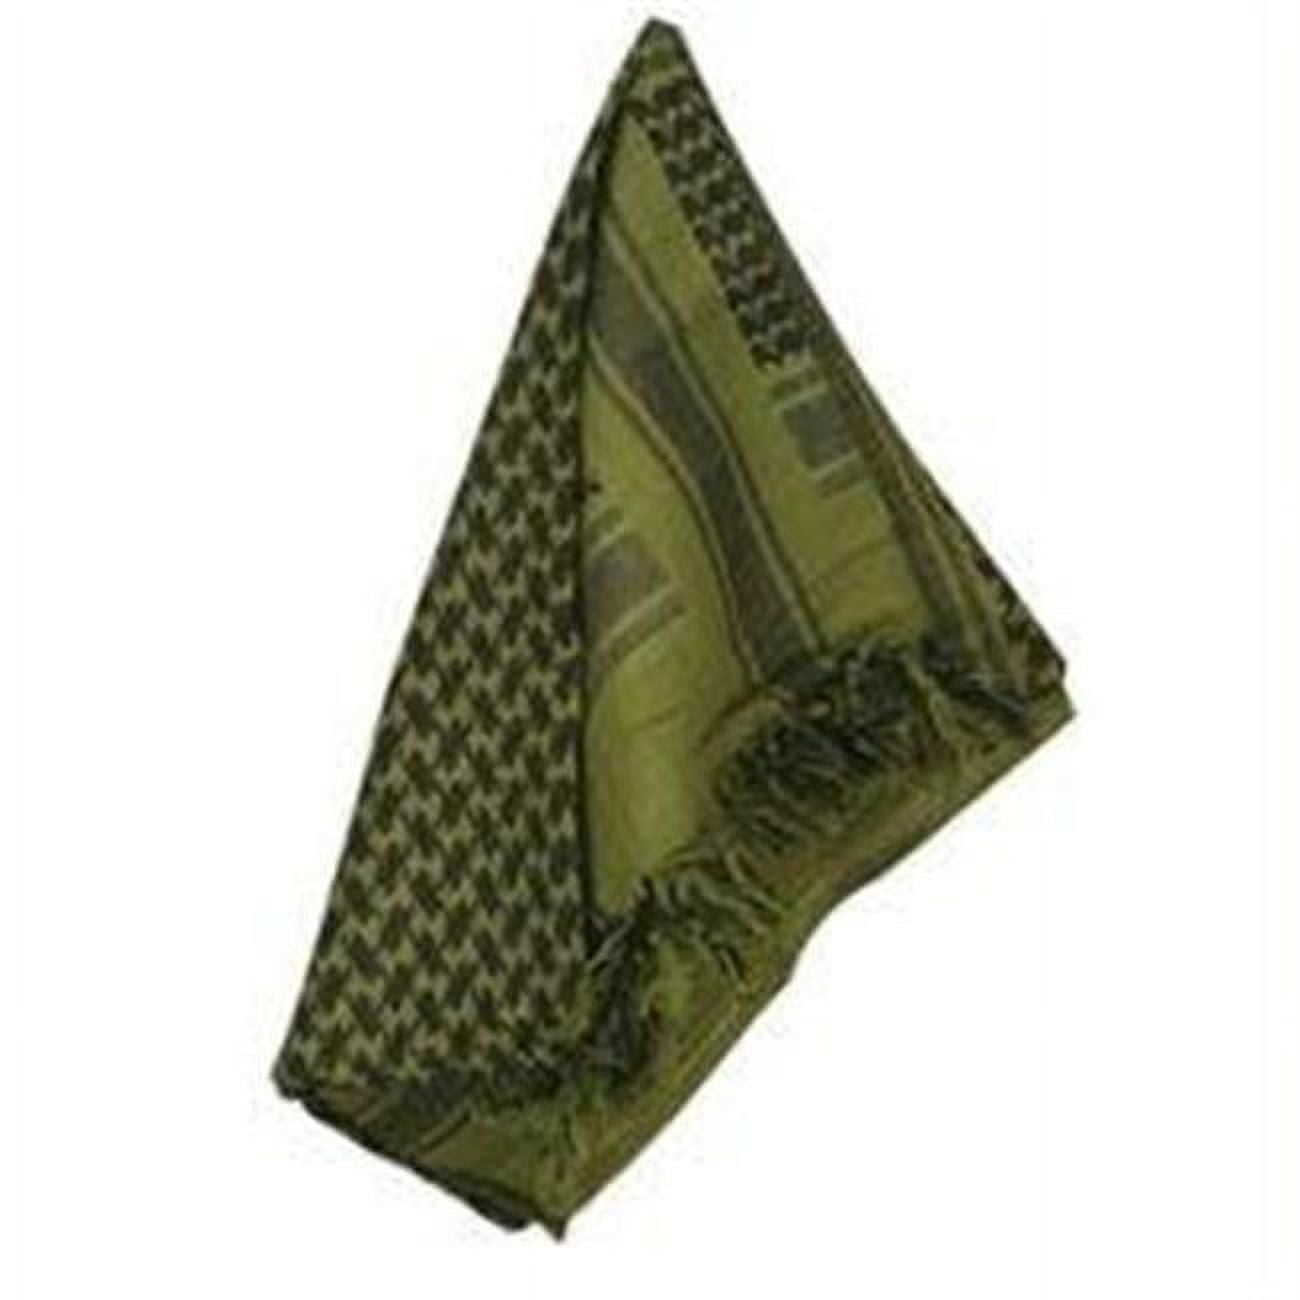 ProForce Camcon Shemagh Head Scarf (Olive/Black) - Blade HQ